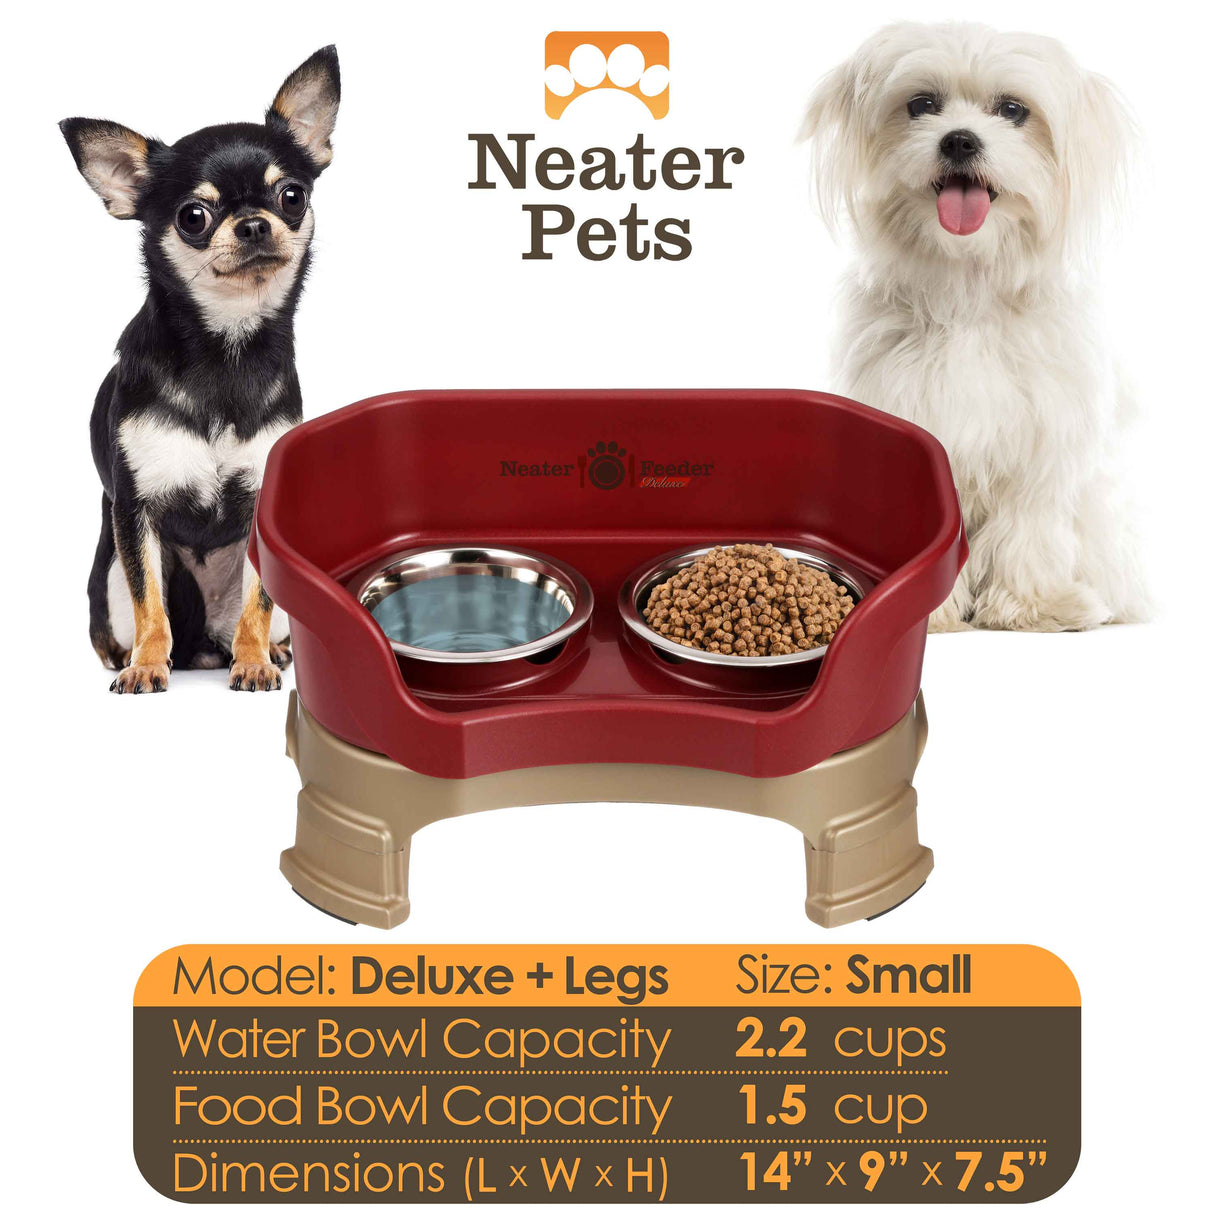 Cranberry Small Dog with leg extensions bowl capacity